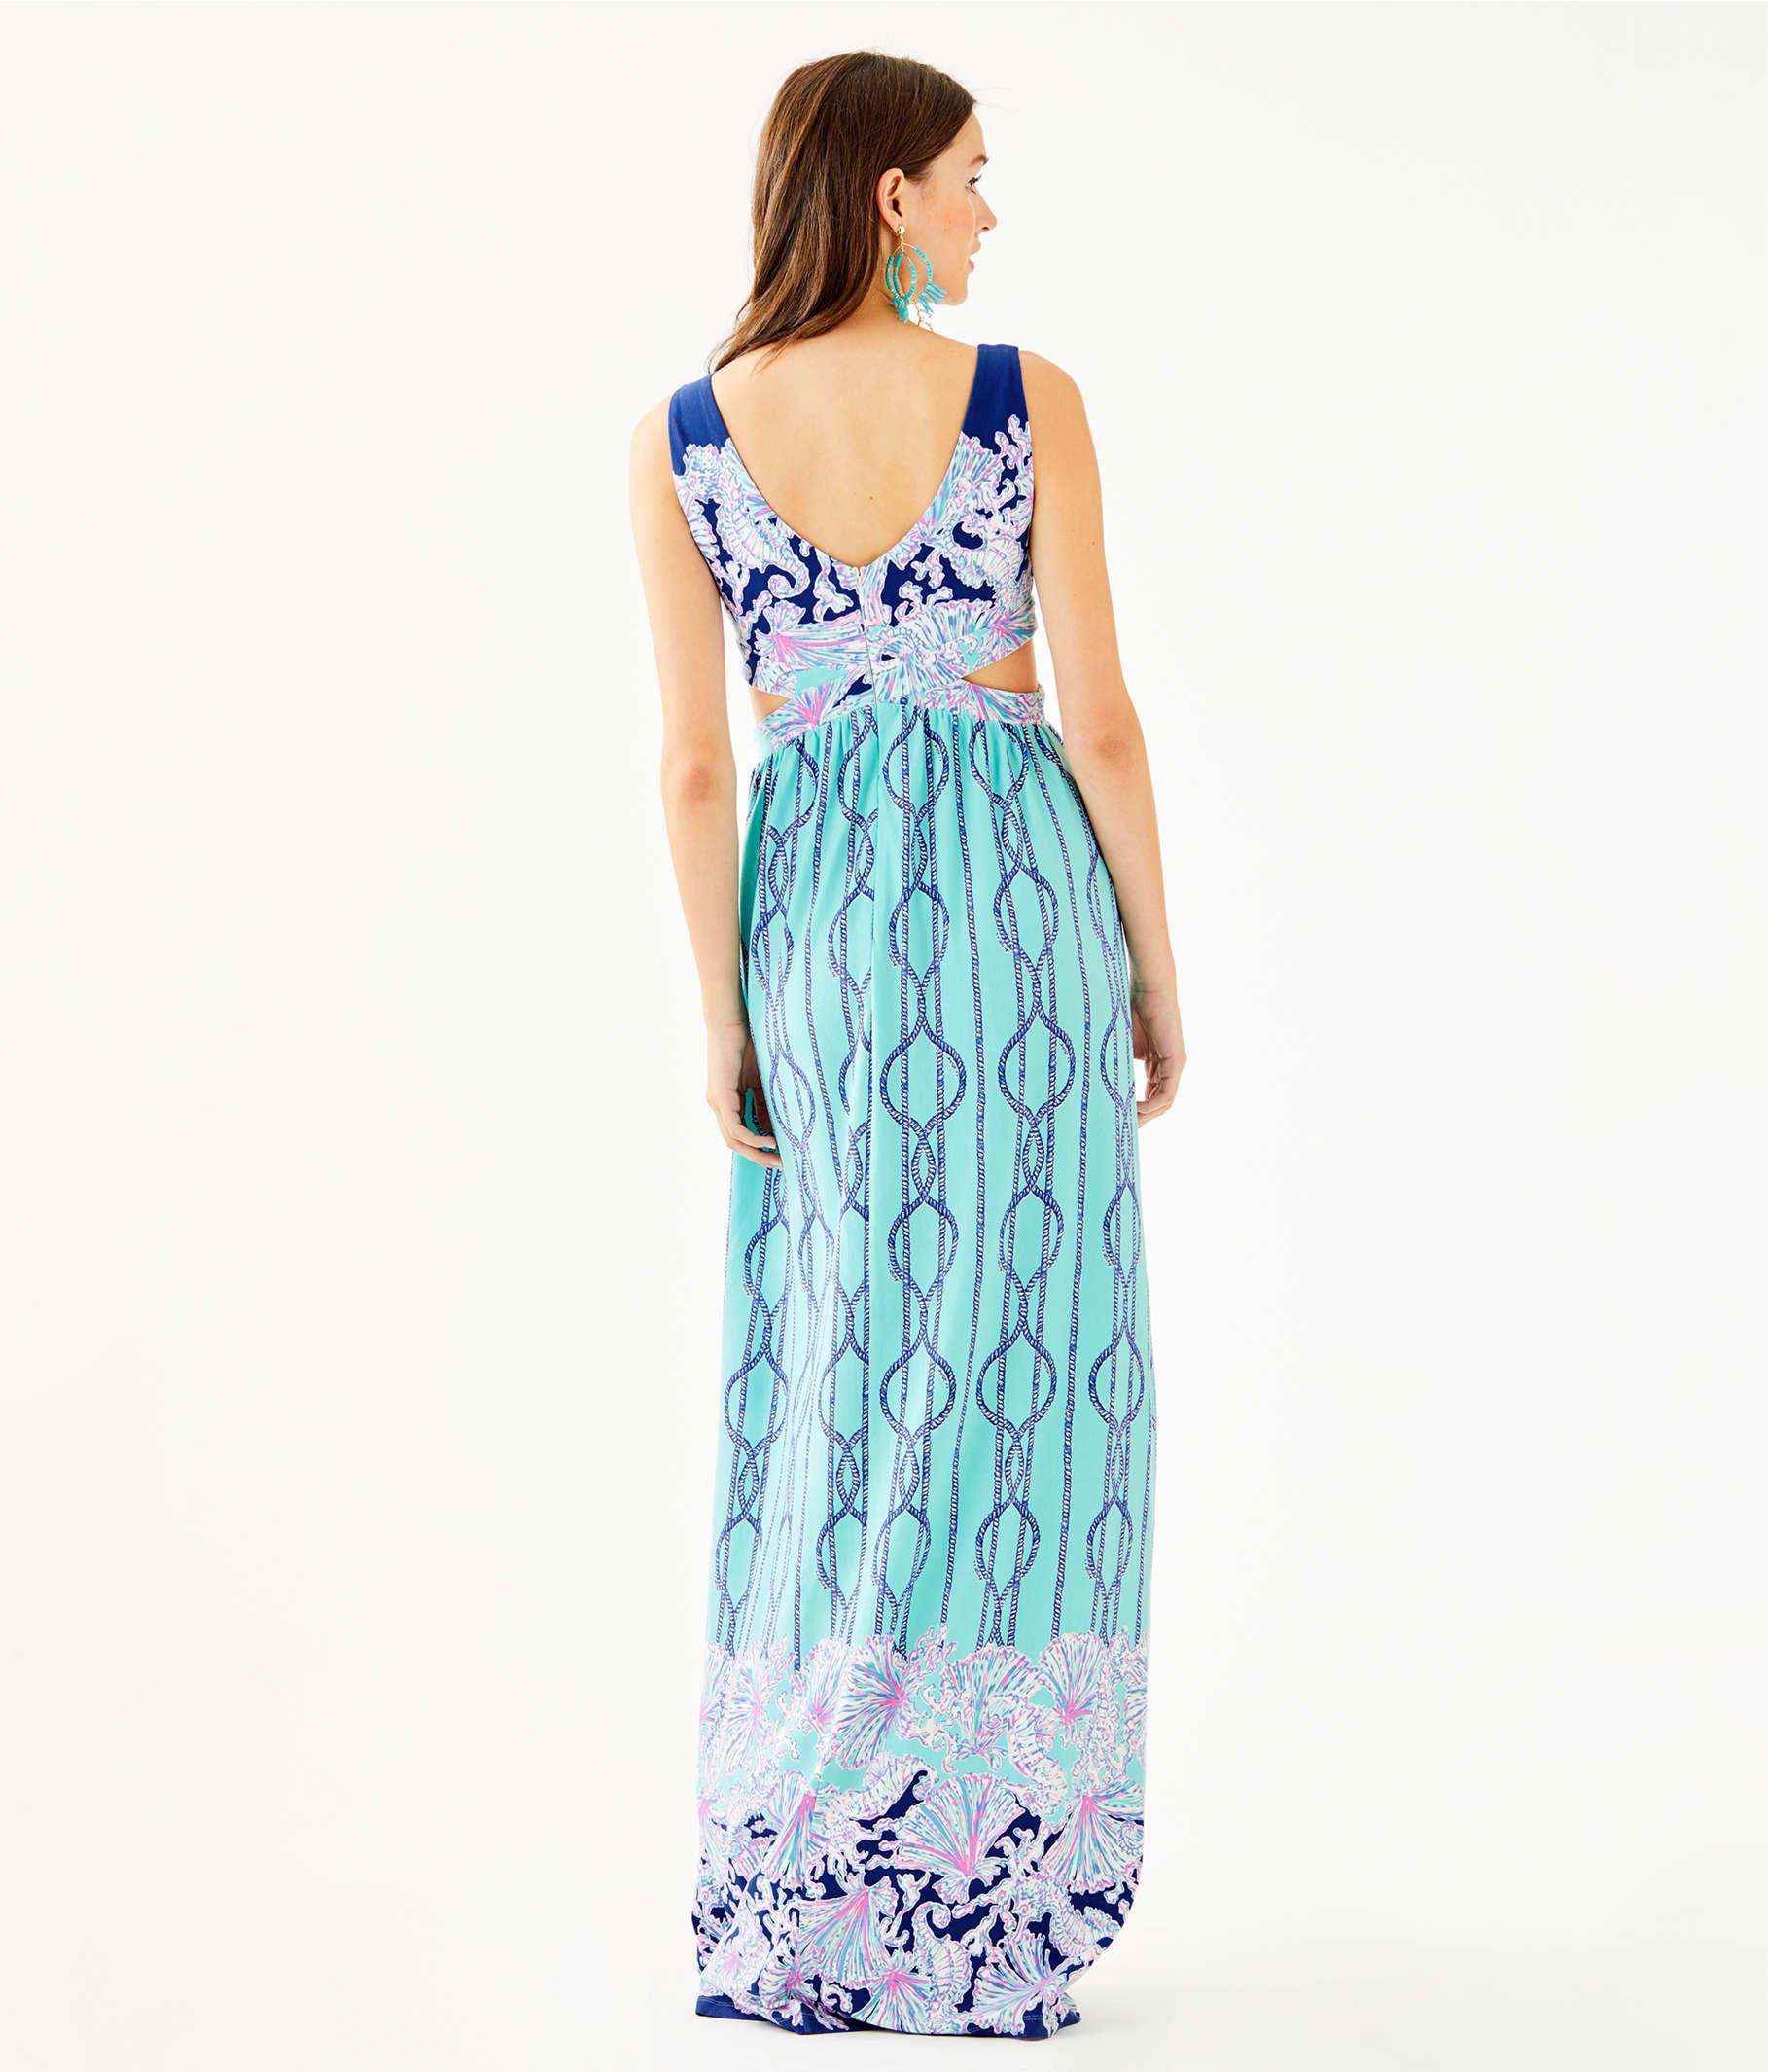 Lilly Pulitzer Marcia Dress Outlet Shop ...